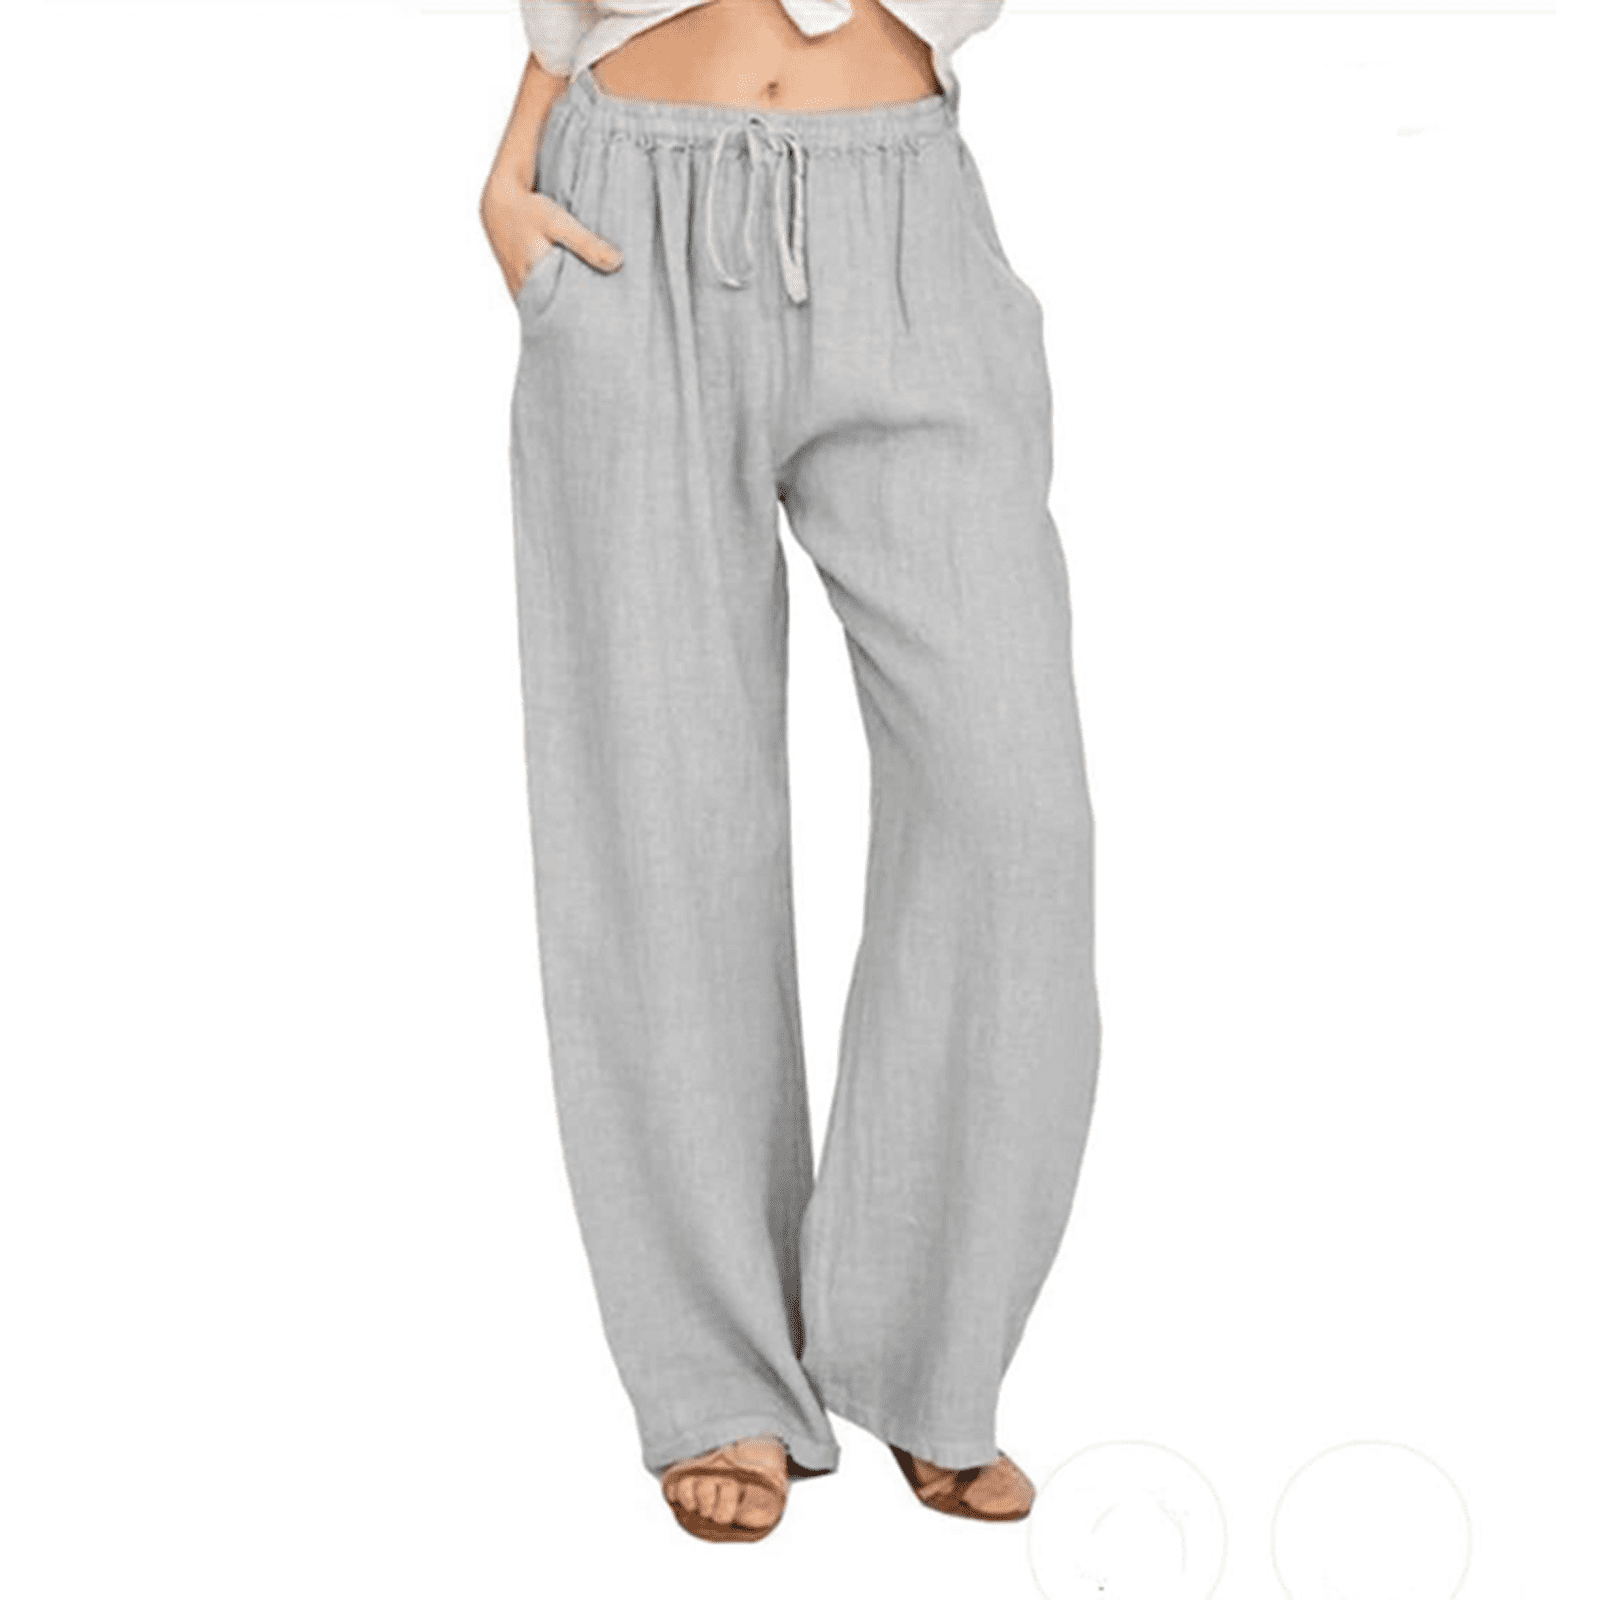 Department 5 Cotton Stratch Flared Pants women - Glamood Outlet